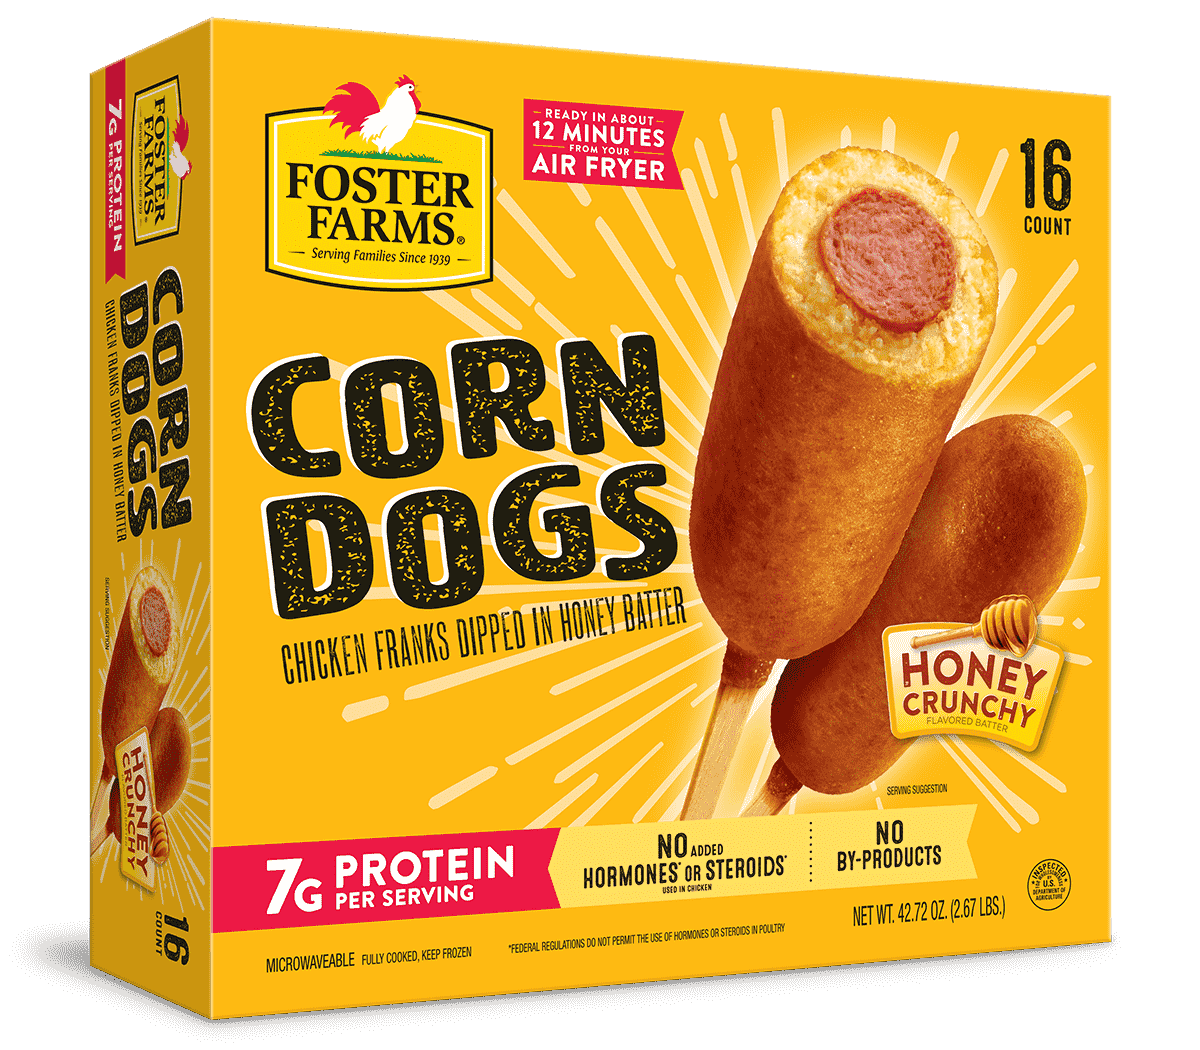 Corn Dogs Honey Crunchy 16 Ct Products Foster Farms | lupon.gov.ph